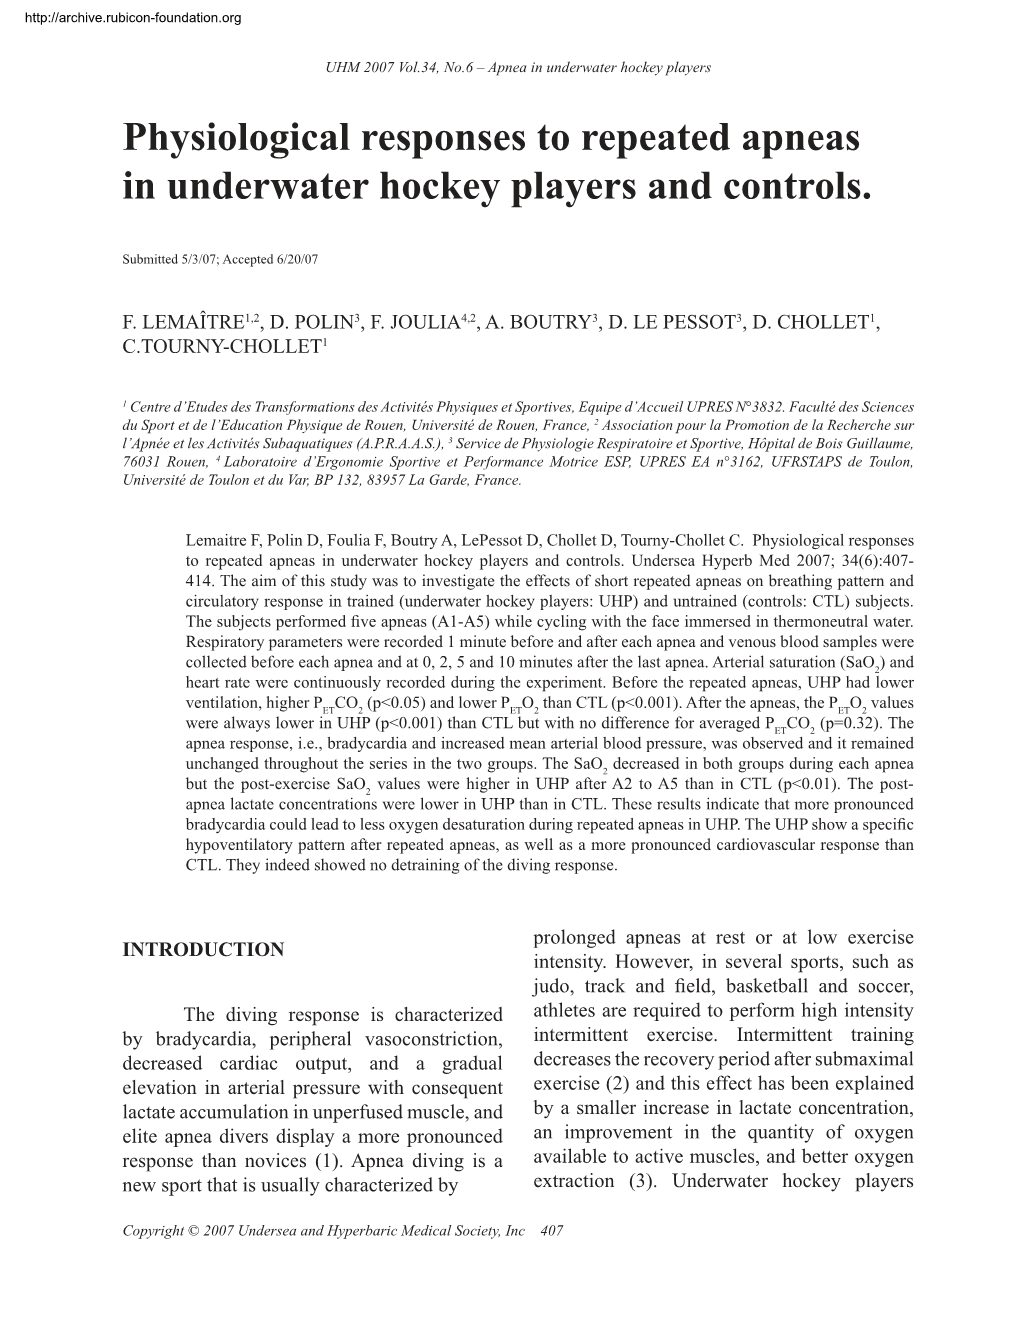 Physiological Responses to Repeated Apneas in Underwater Hockey Players and Controls